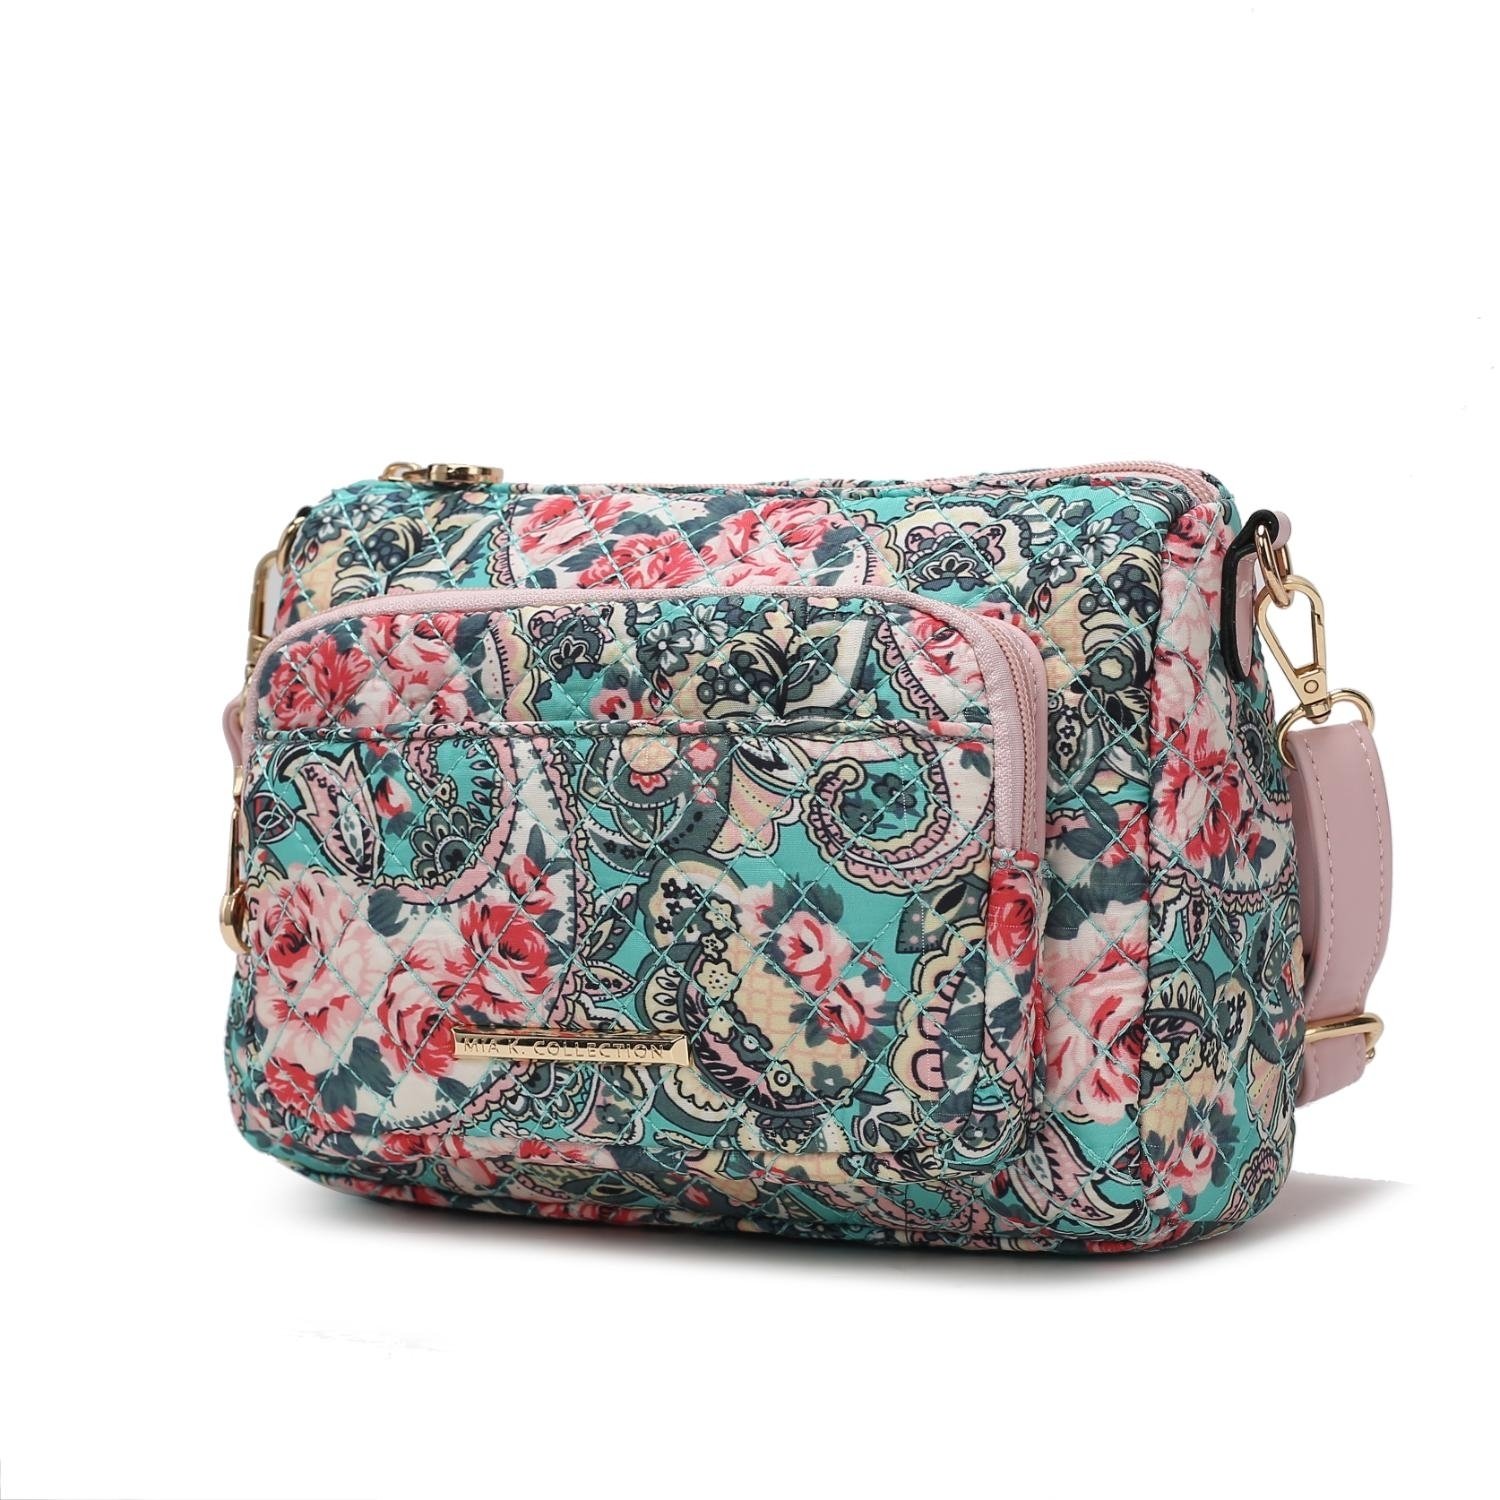 MKF Collection Rosalie Quilted Cotton Botanical Pattern Women's Shoulder Bag By Mia K - Green